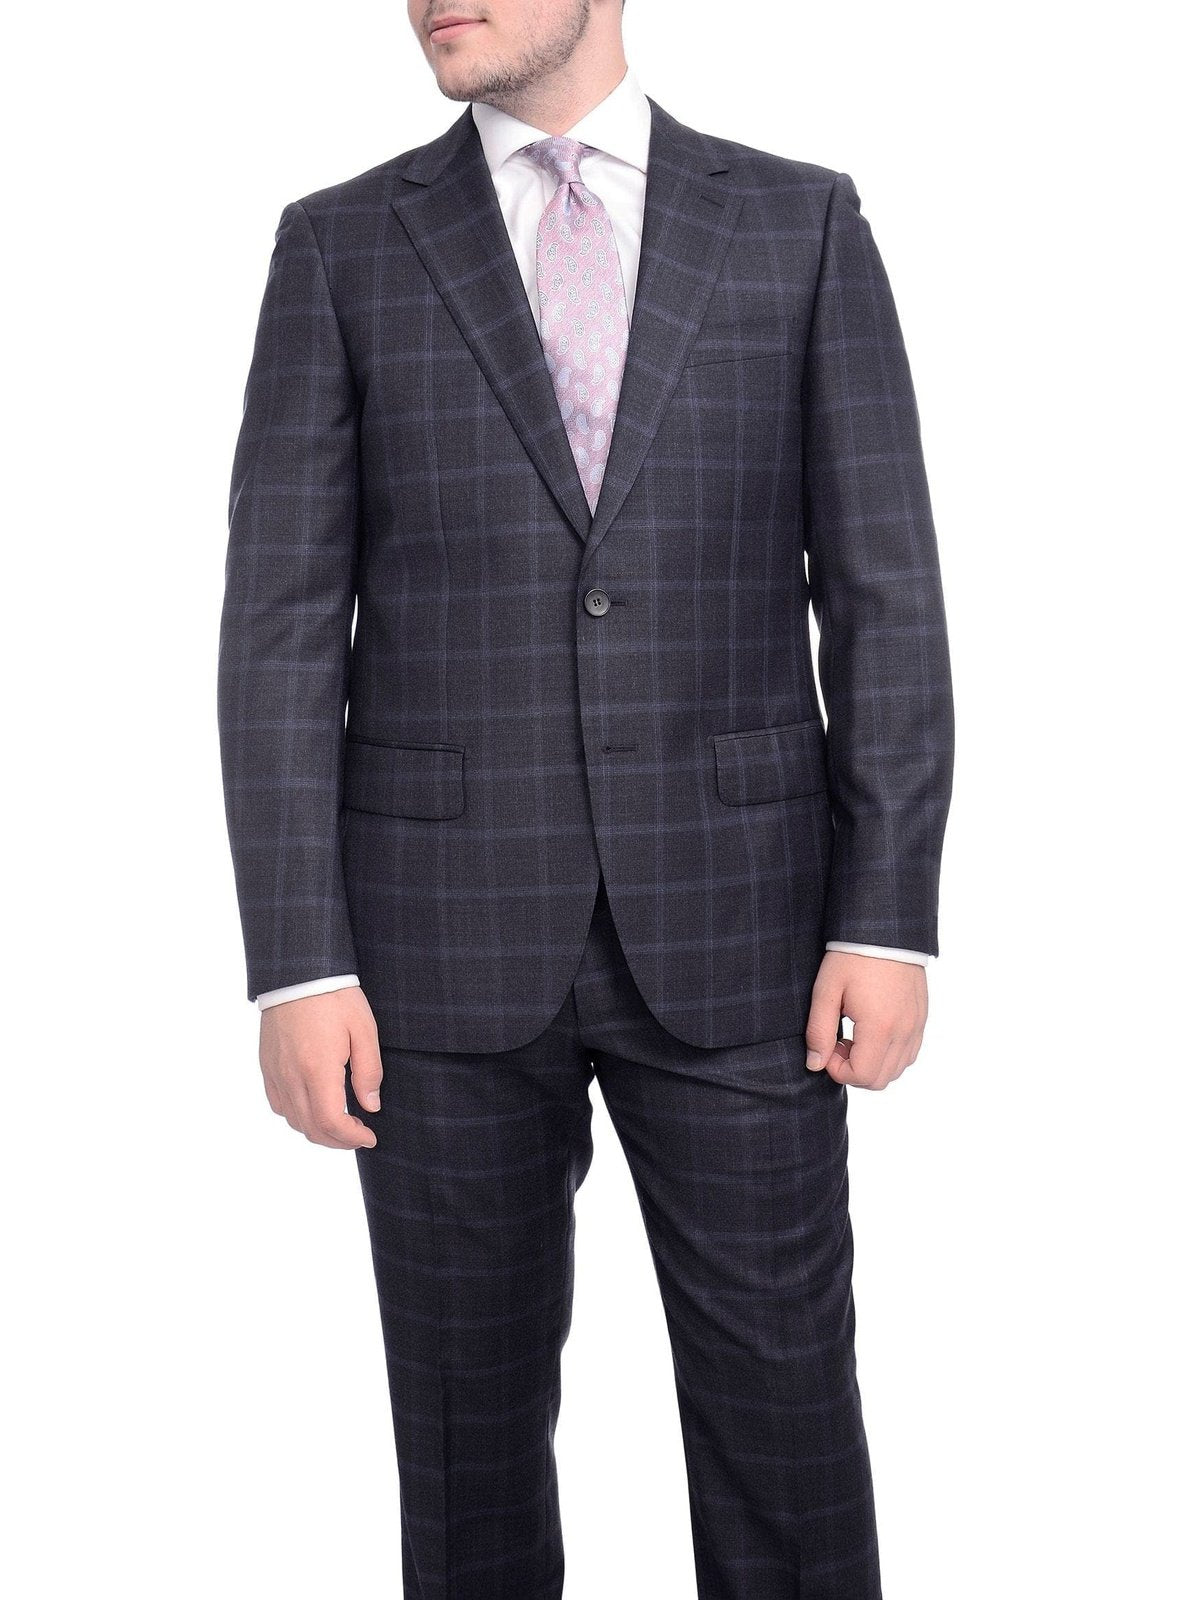 Napoli TWO PIECE SUITS Napoli Classic Fit Navy Blue Windowpane Half Canvassed Super 150s Wool Suit